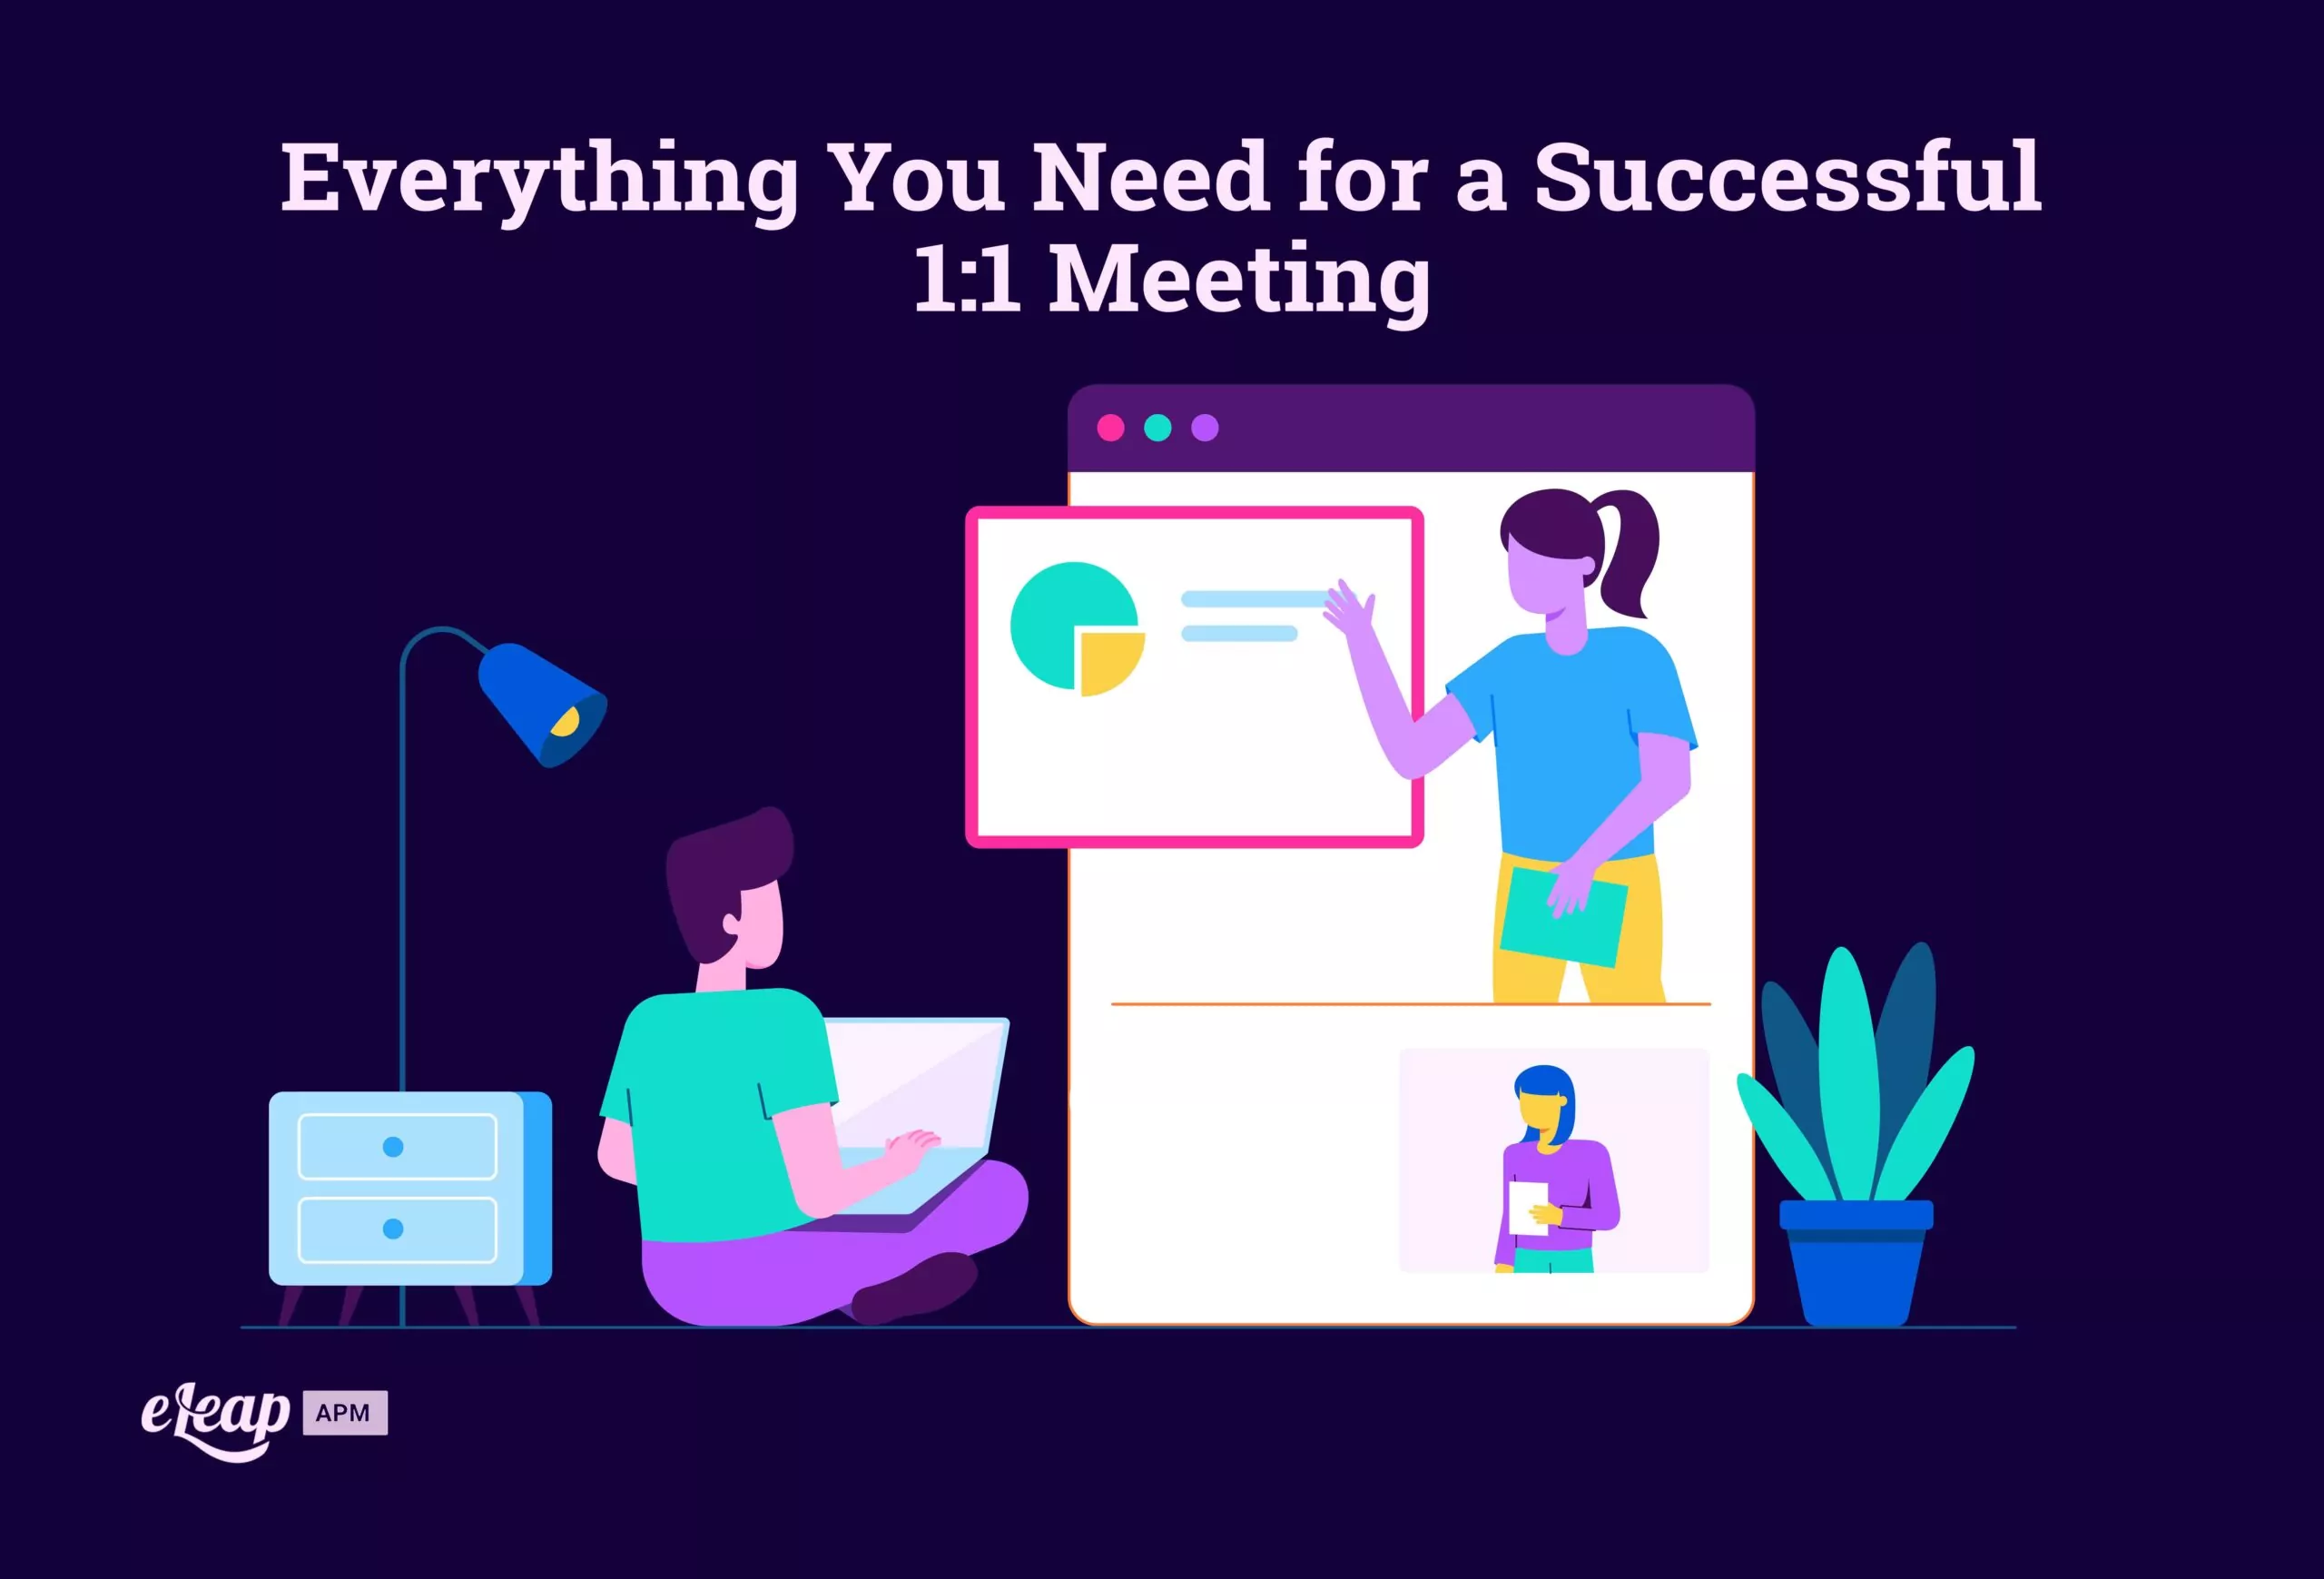 Everything You Need for a Successful 1:1 Meeting